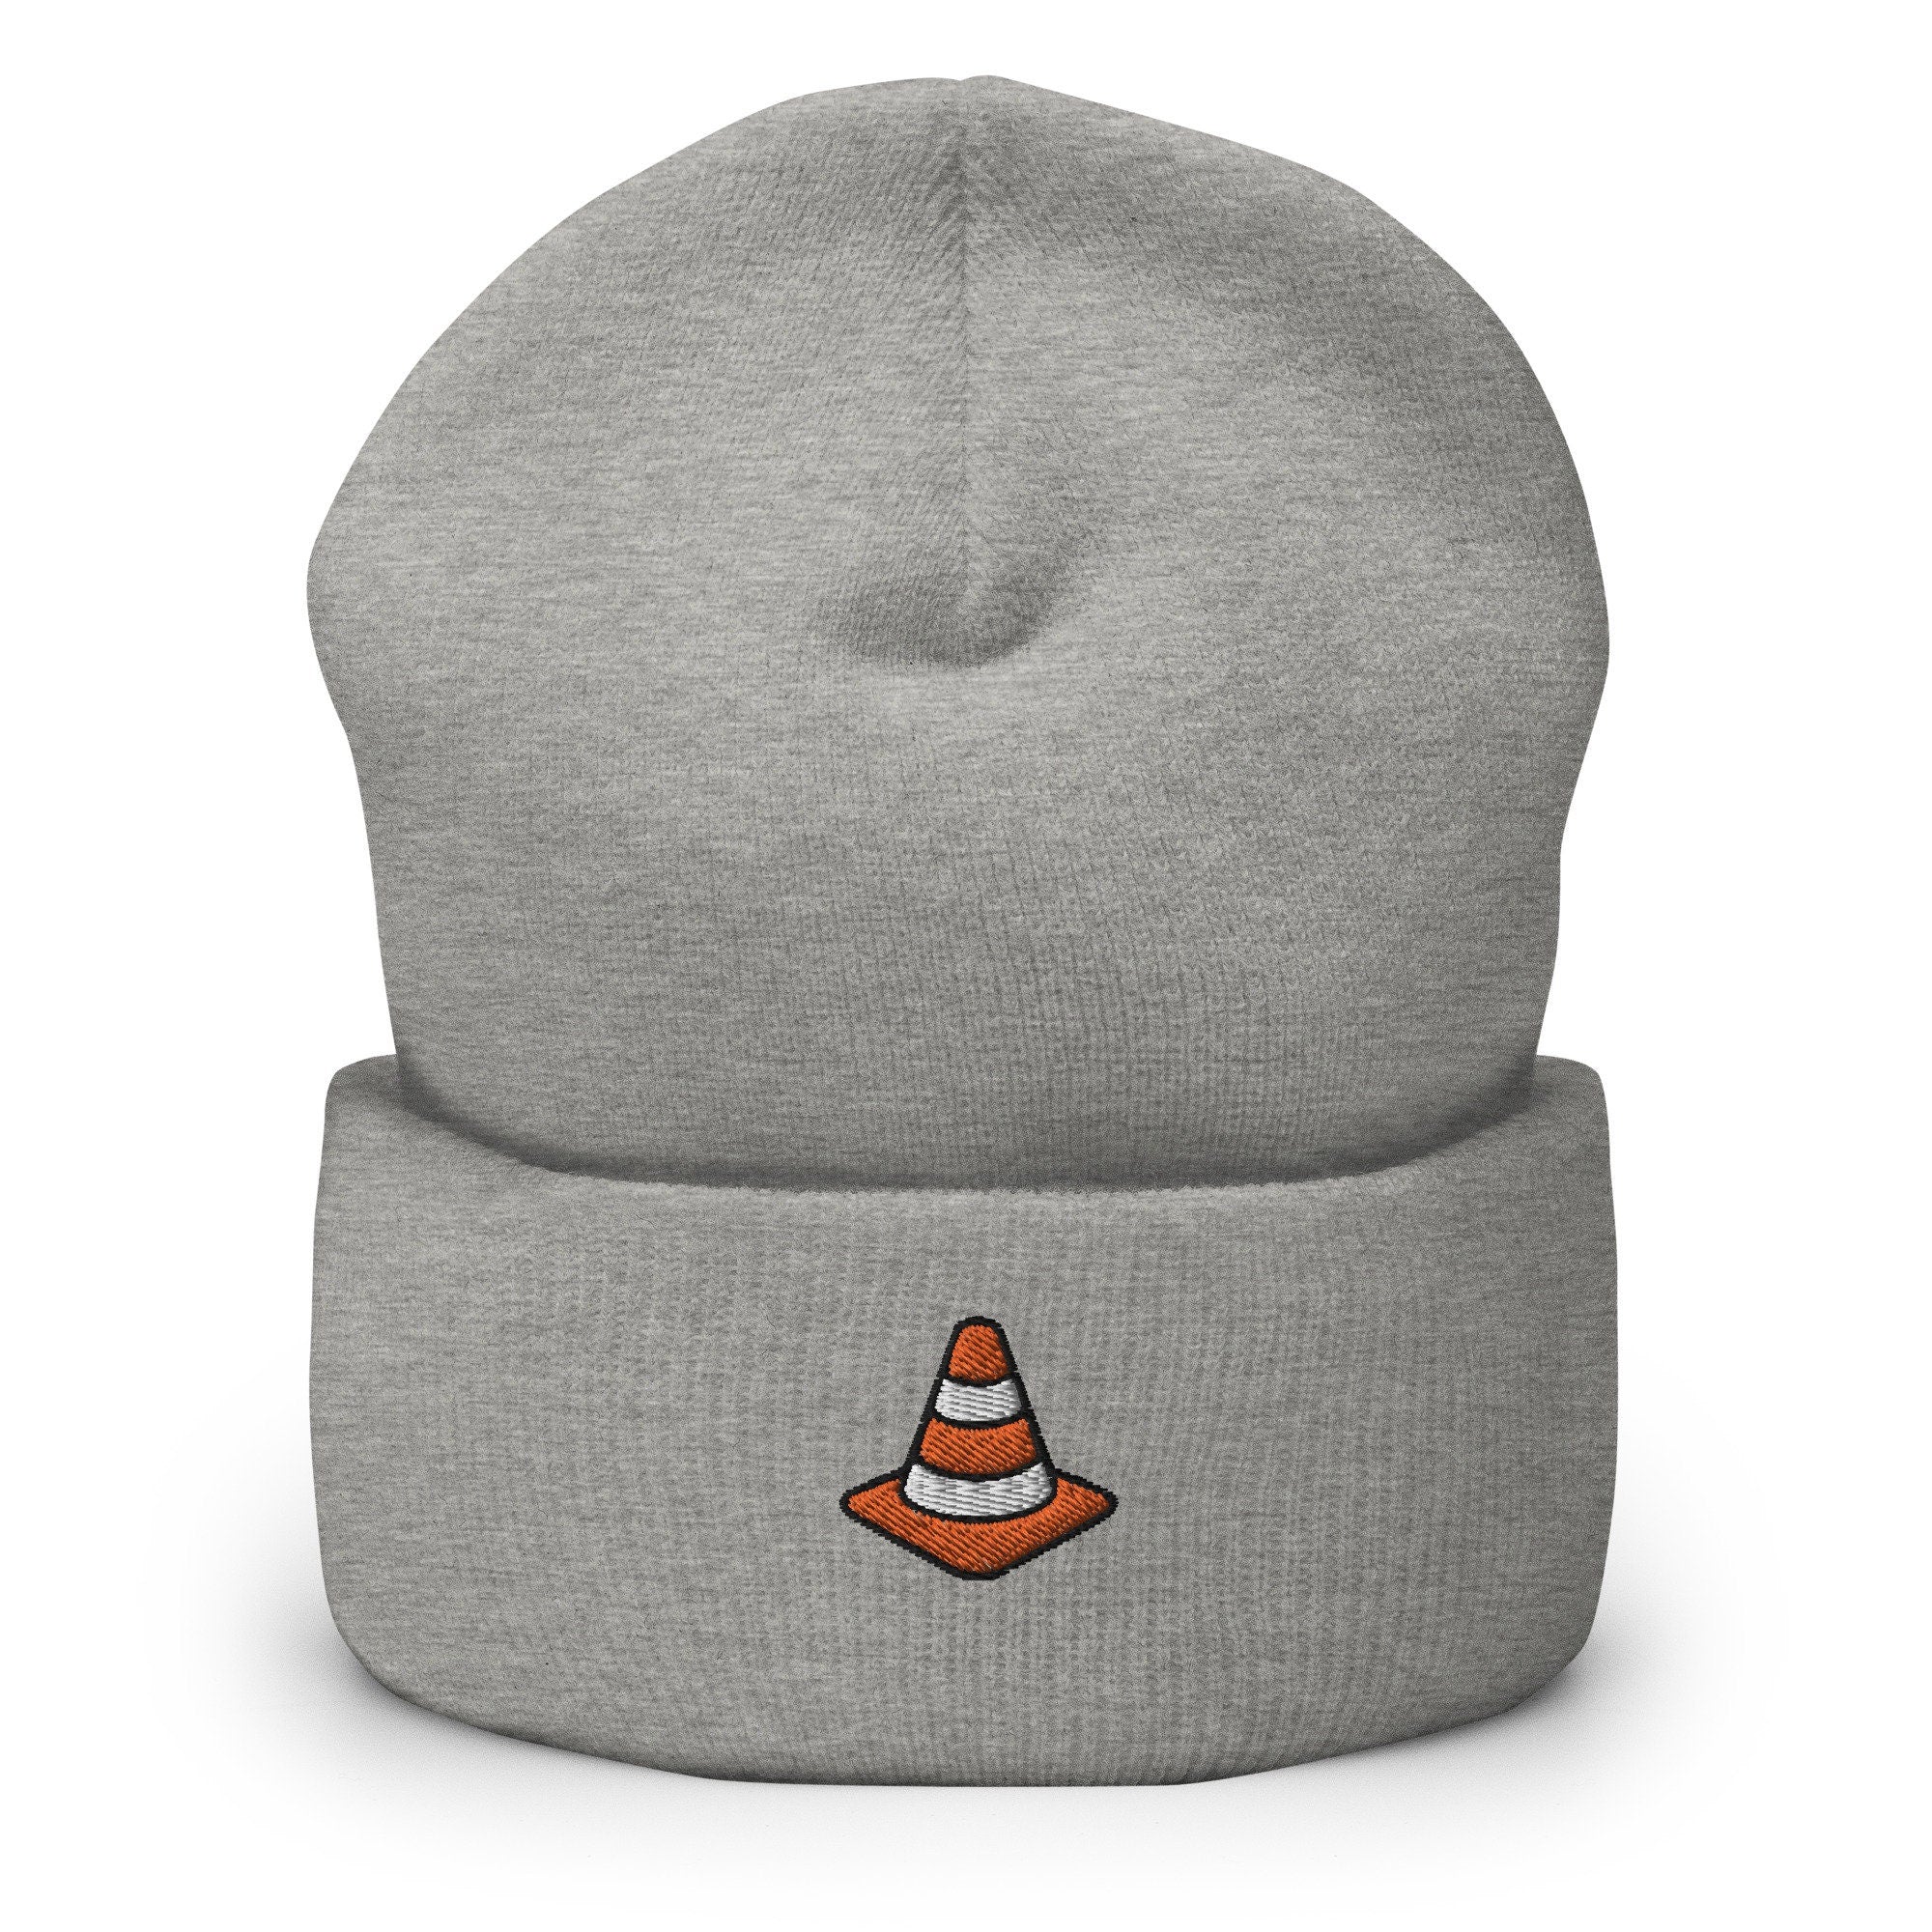 Traffic Safety Cone Embroidered Beanie, Handmade Cuffed Knit Unisex Slouchy Adult Winter Hat Cap Gift